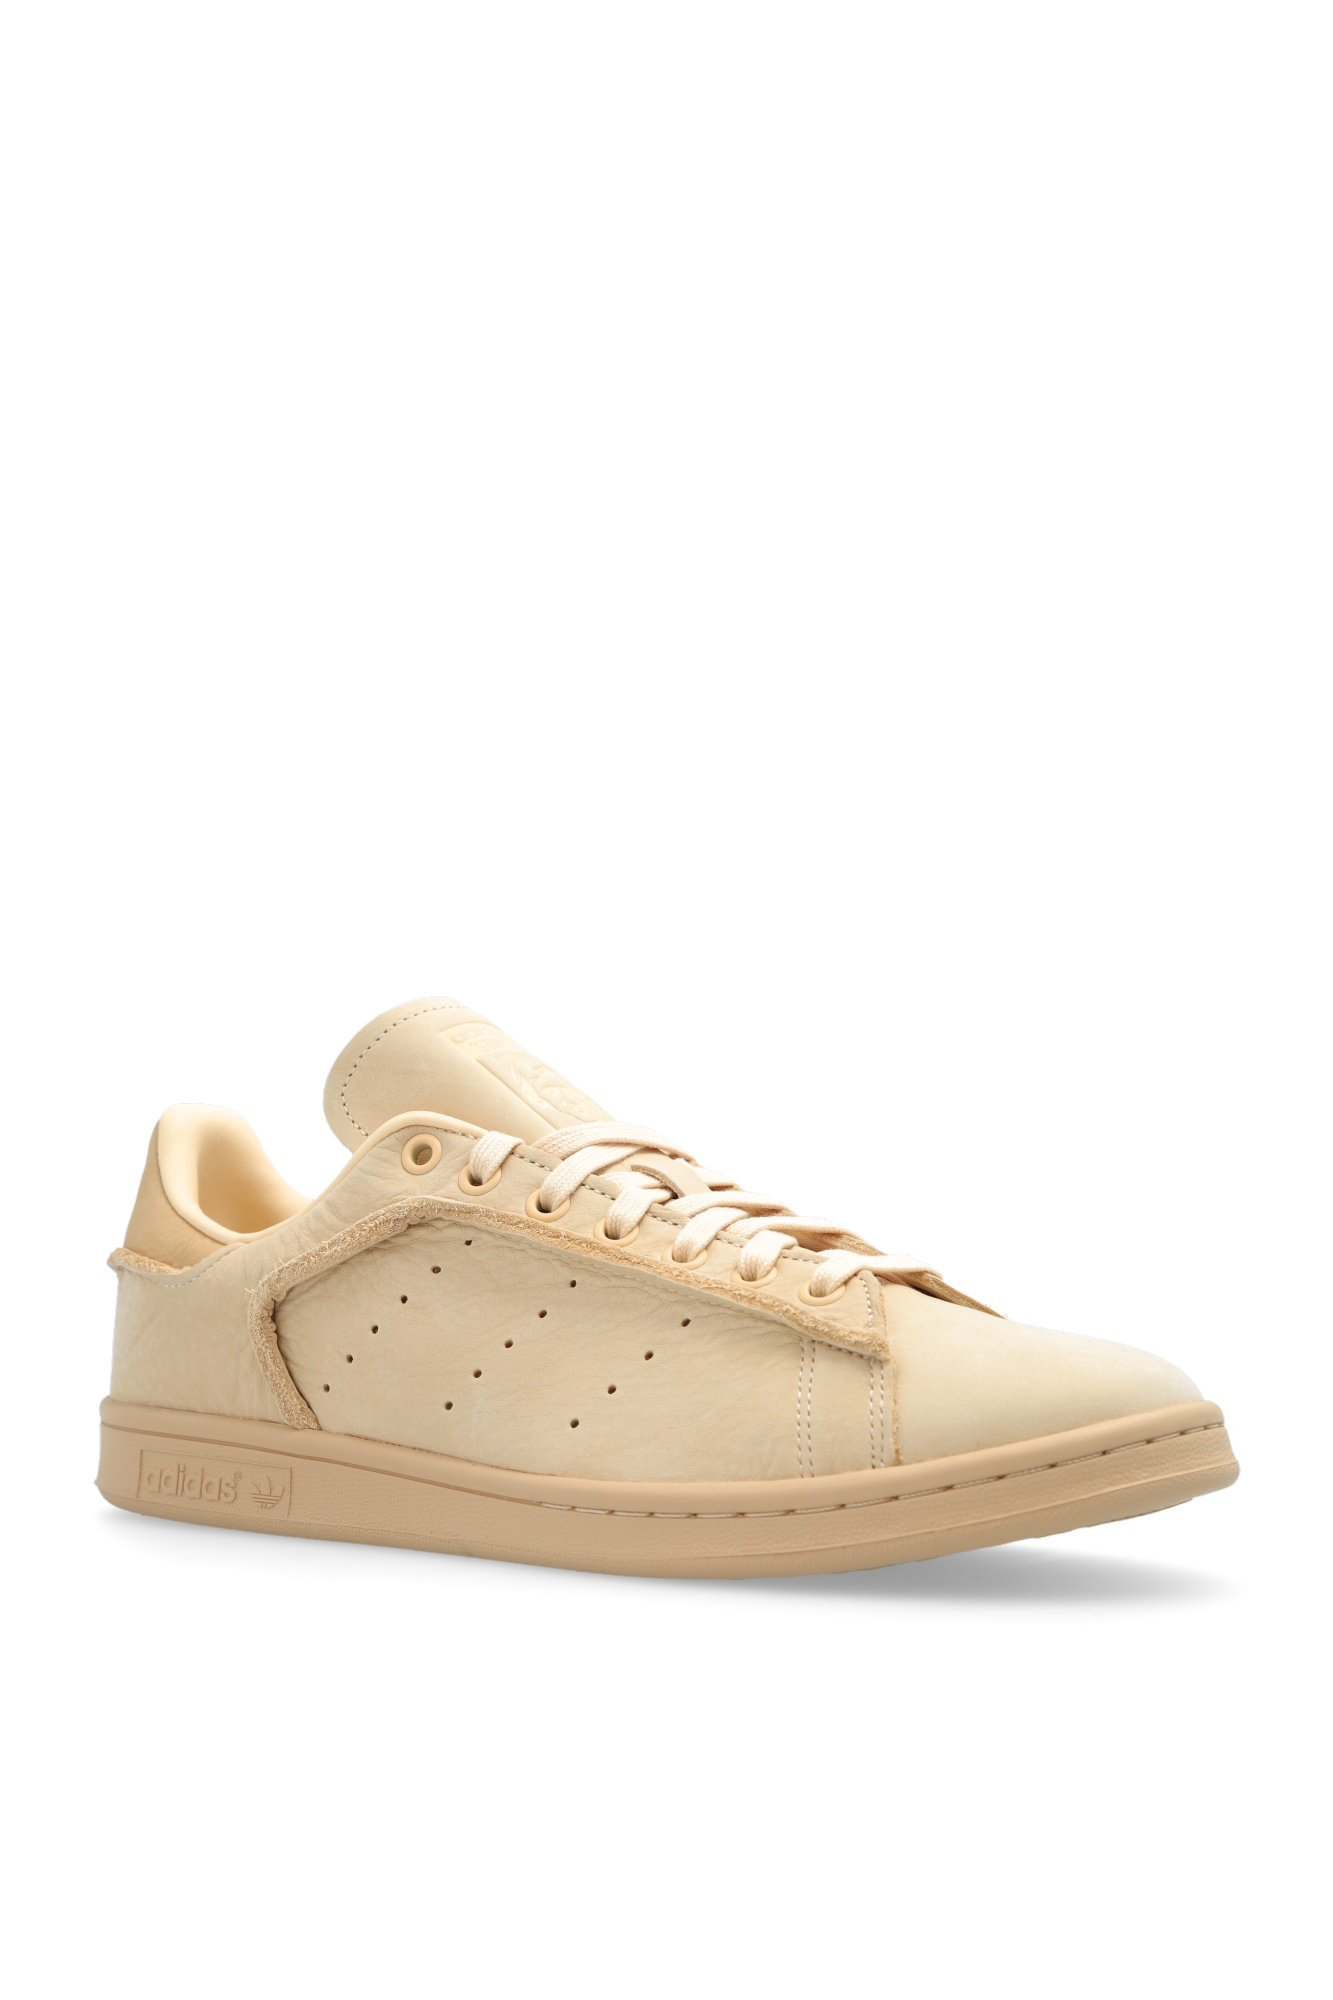 ADIDAS ORIGINALS Stan Smith Lux leather sneakers